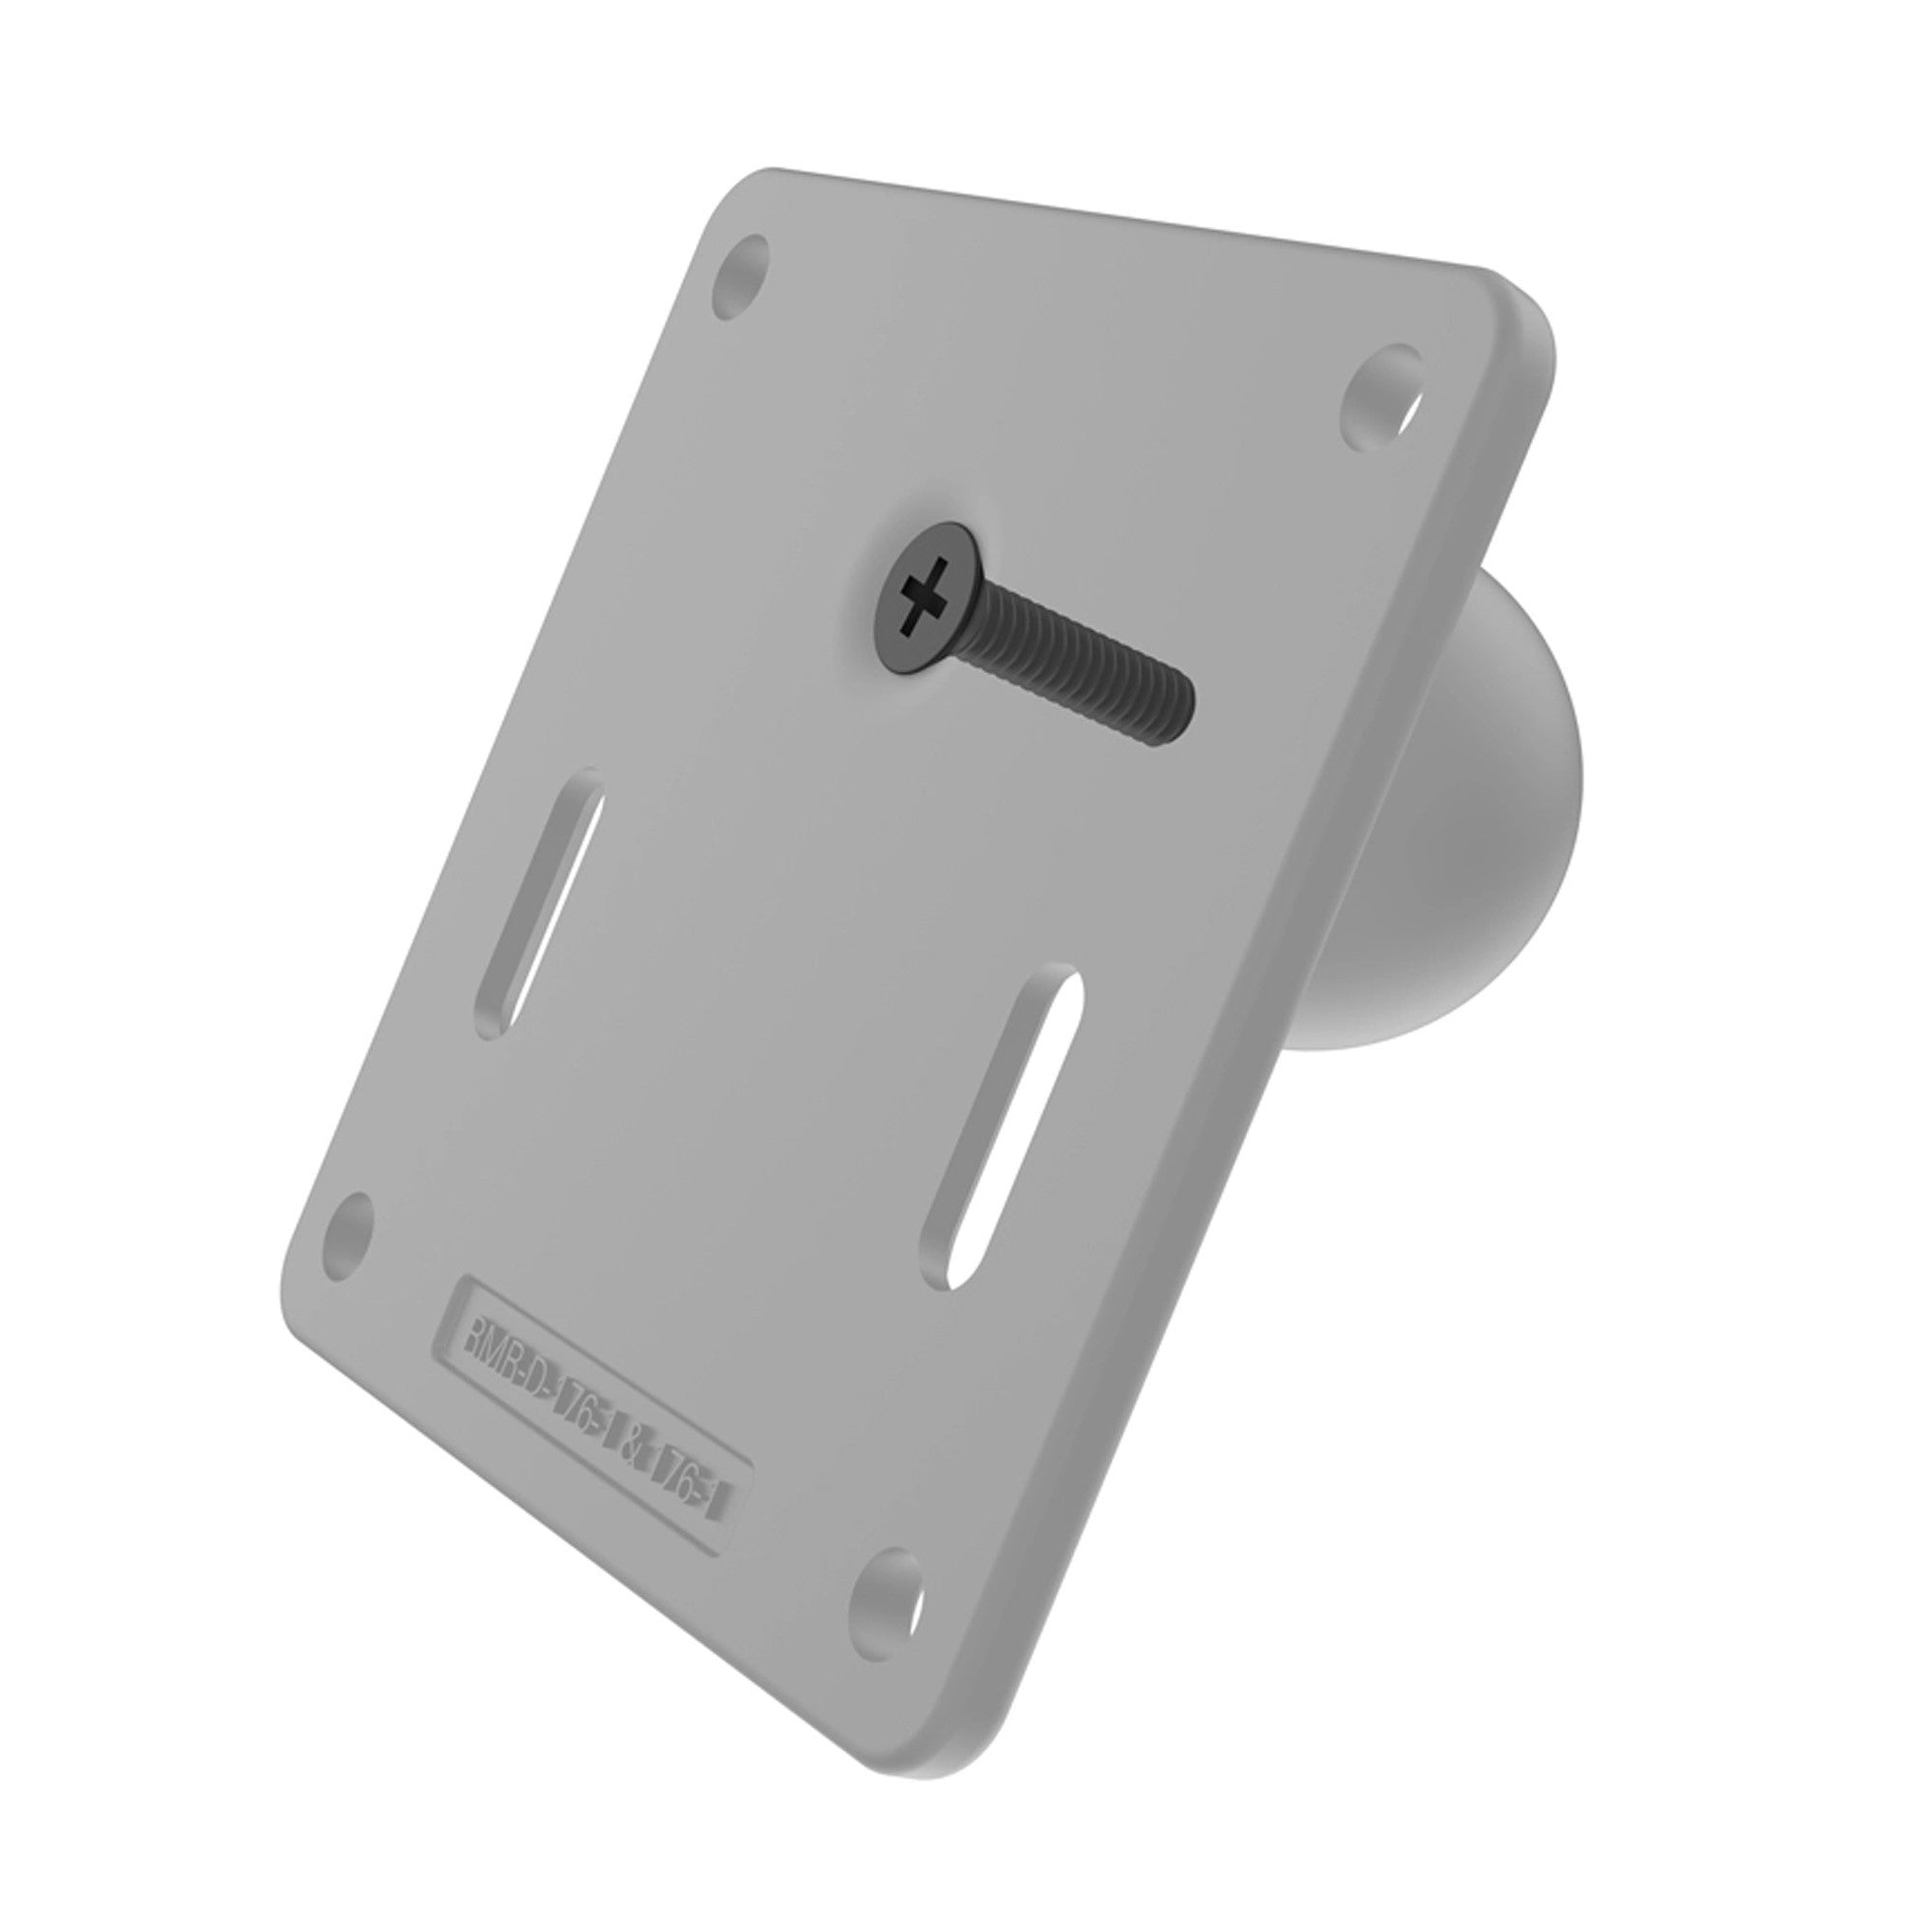 RAM 75x75mm VESA Plate with Ball and Steel Reinforced Post - C-Size